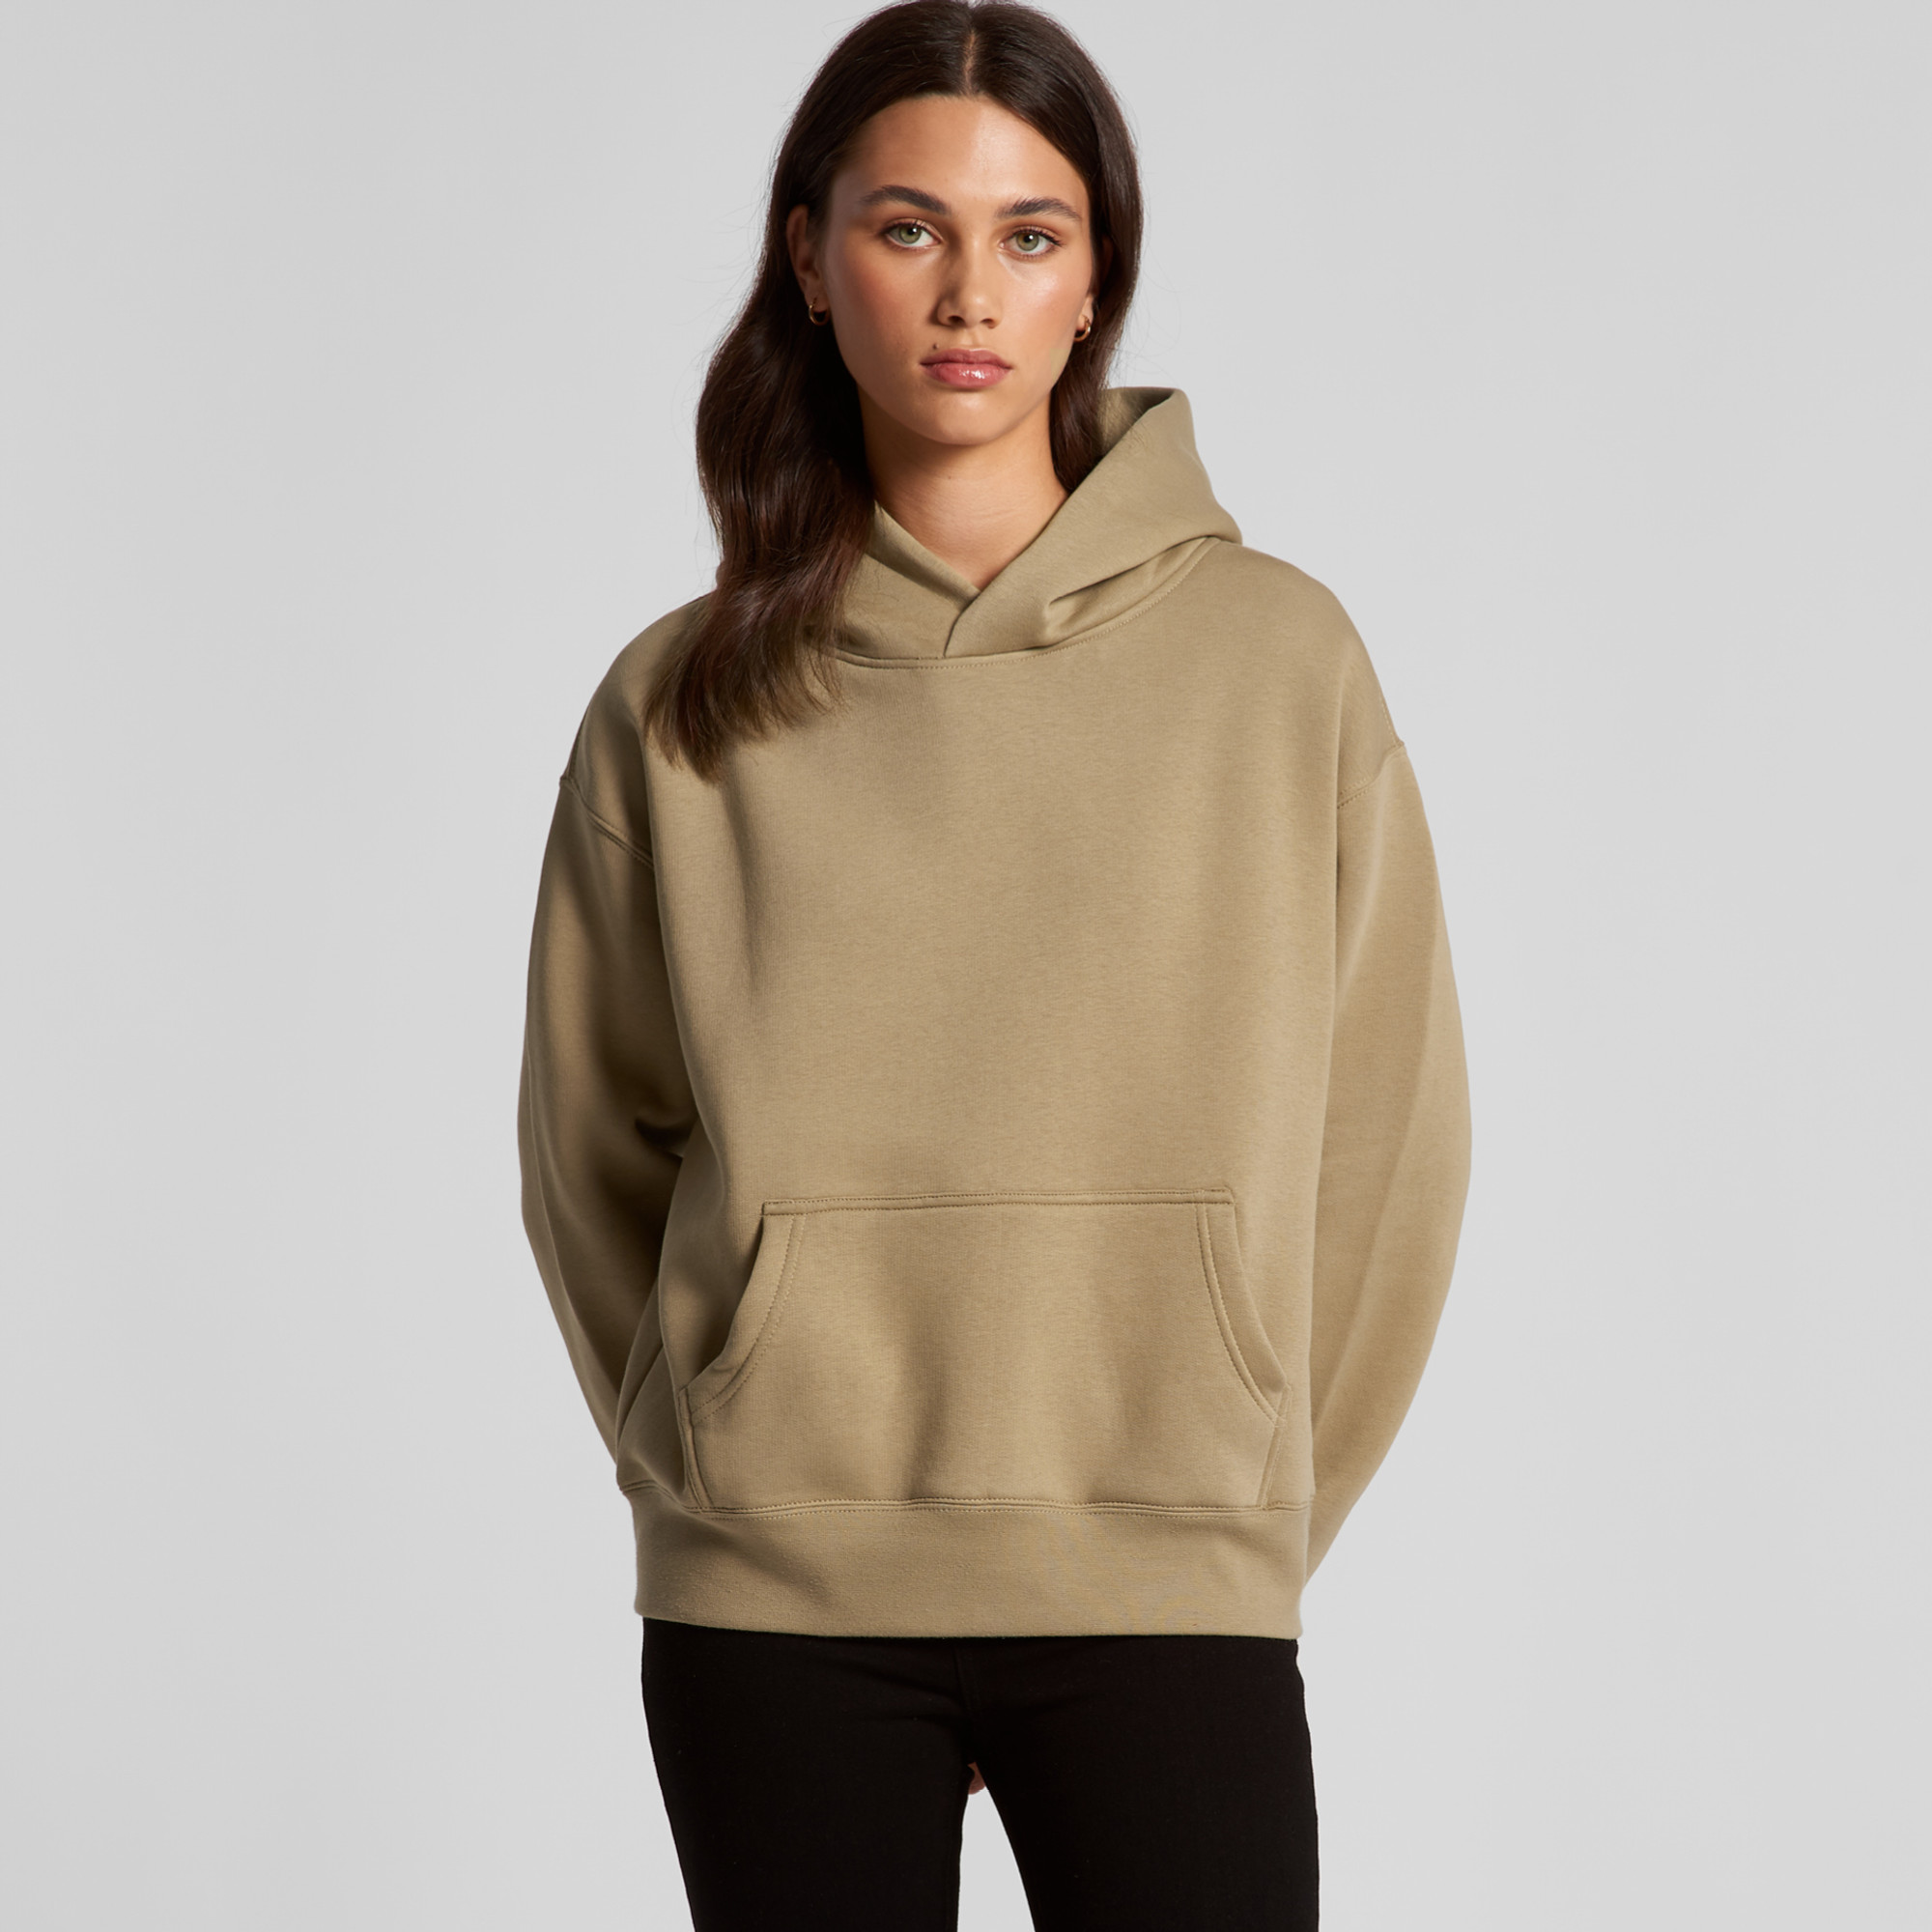 Wo's Relax Hood - 4161 - AS Colour US